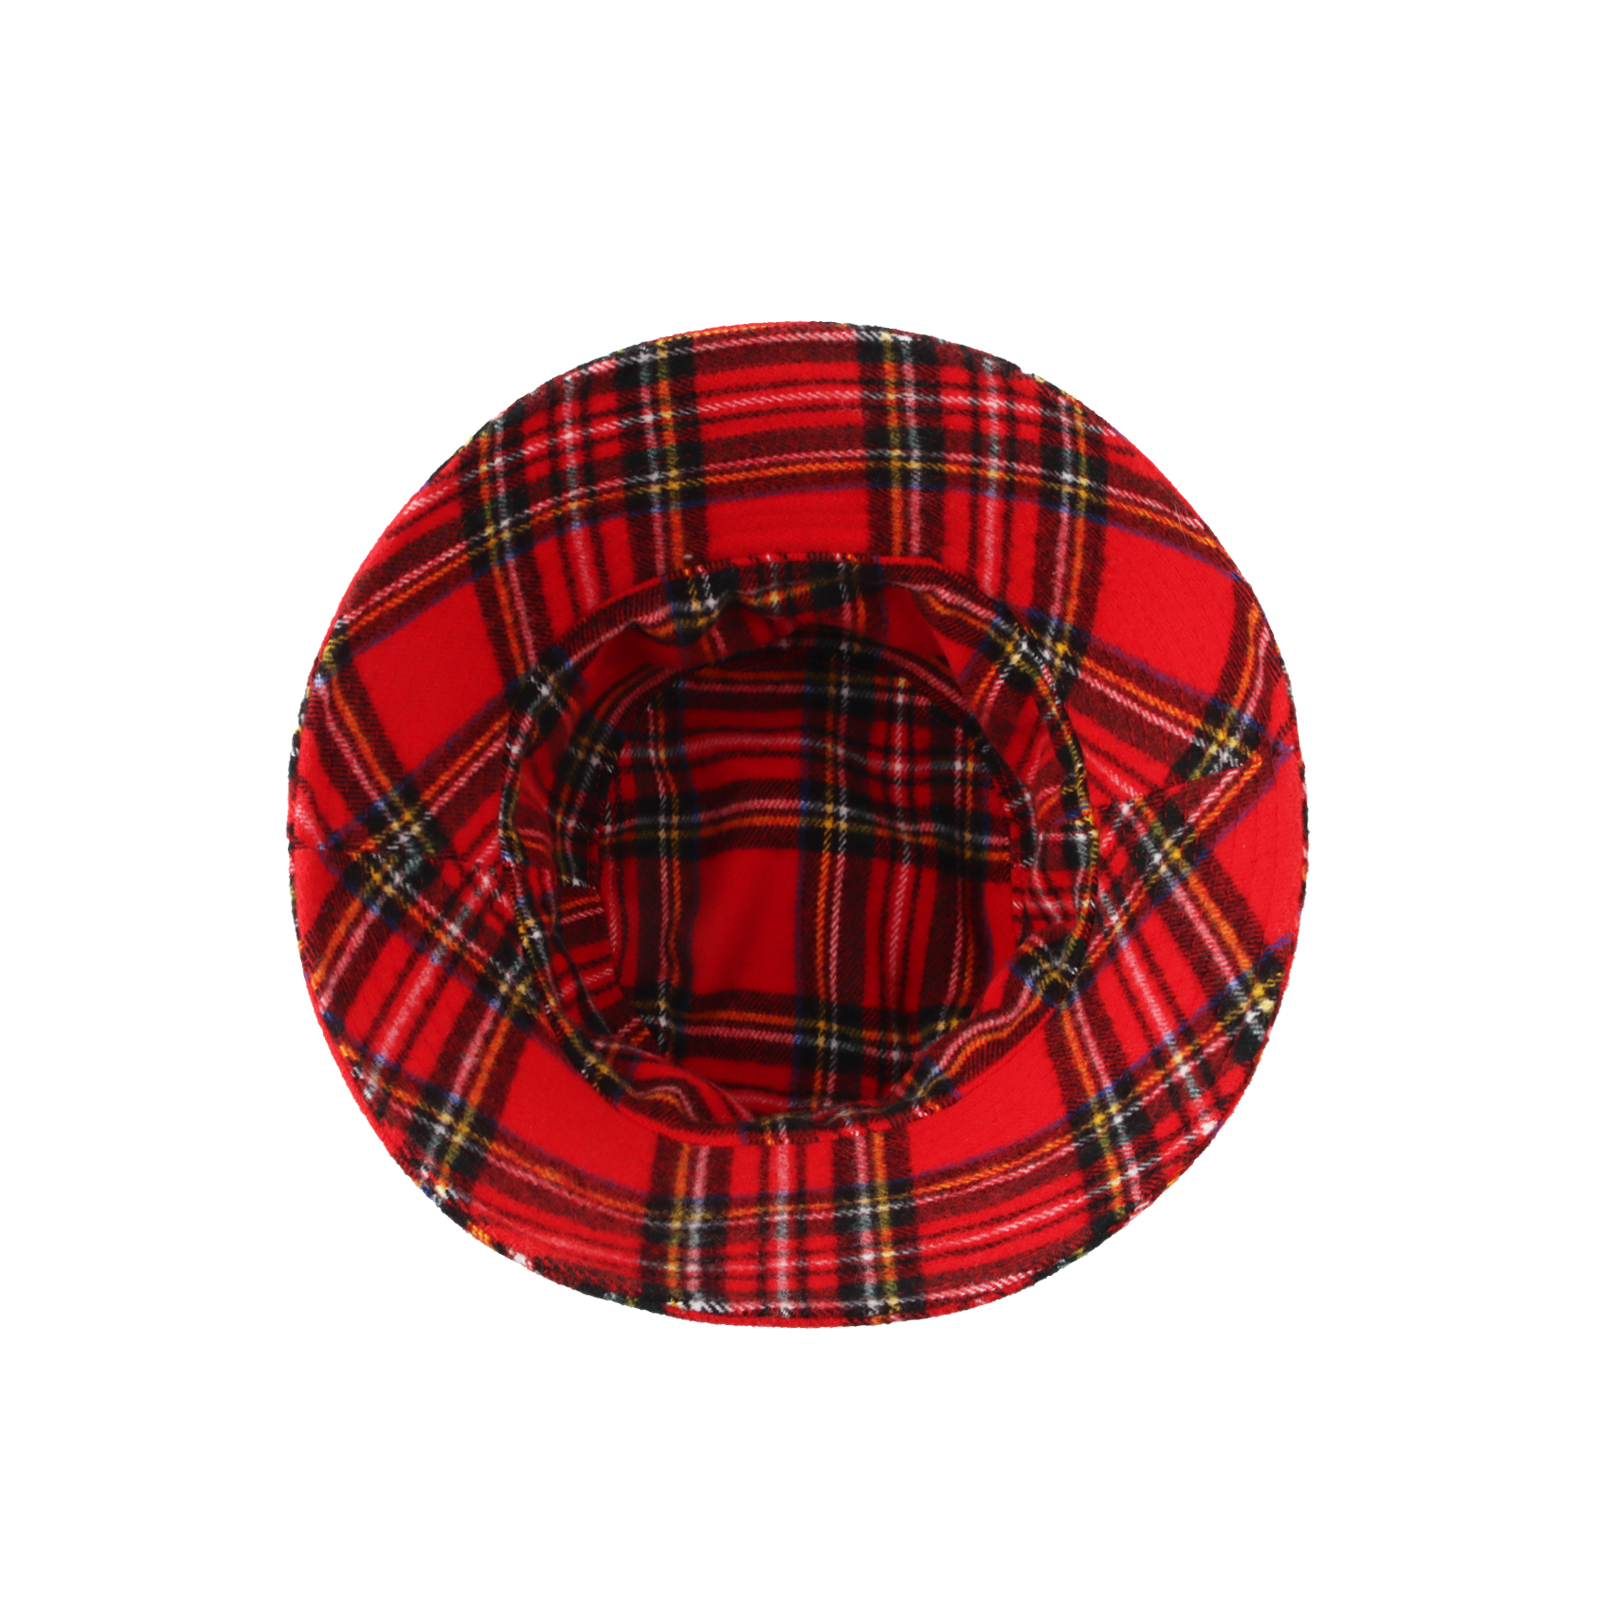 WITHMOONS Polyester Plaid Tartan Bucket Fedora Hat Winter Check Cap HMB1299 (Red) - image 5 of 5